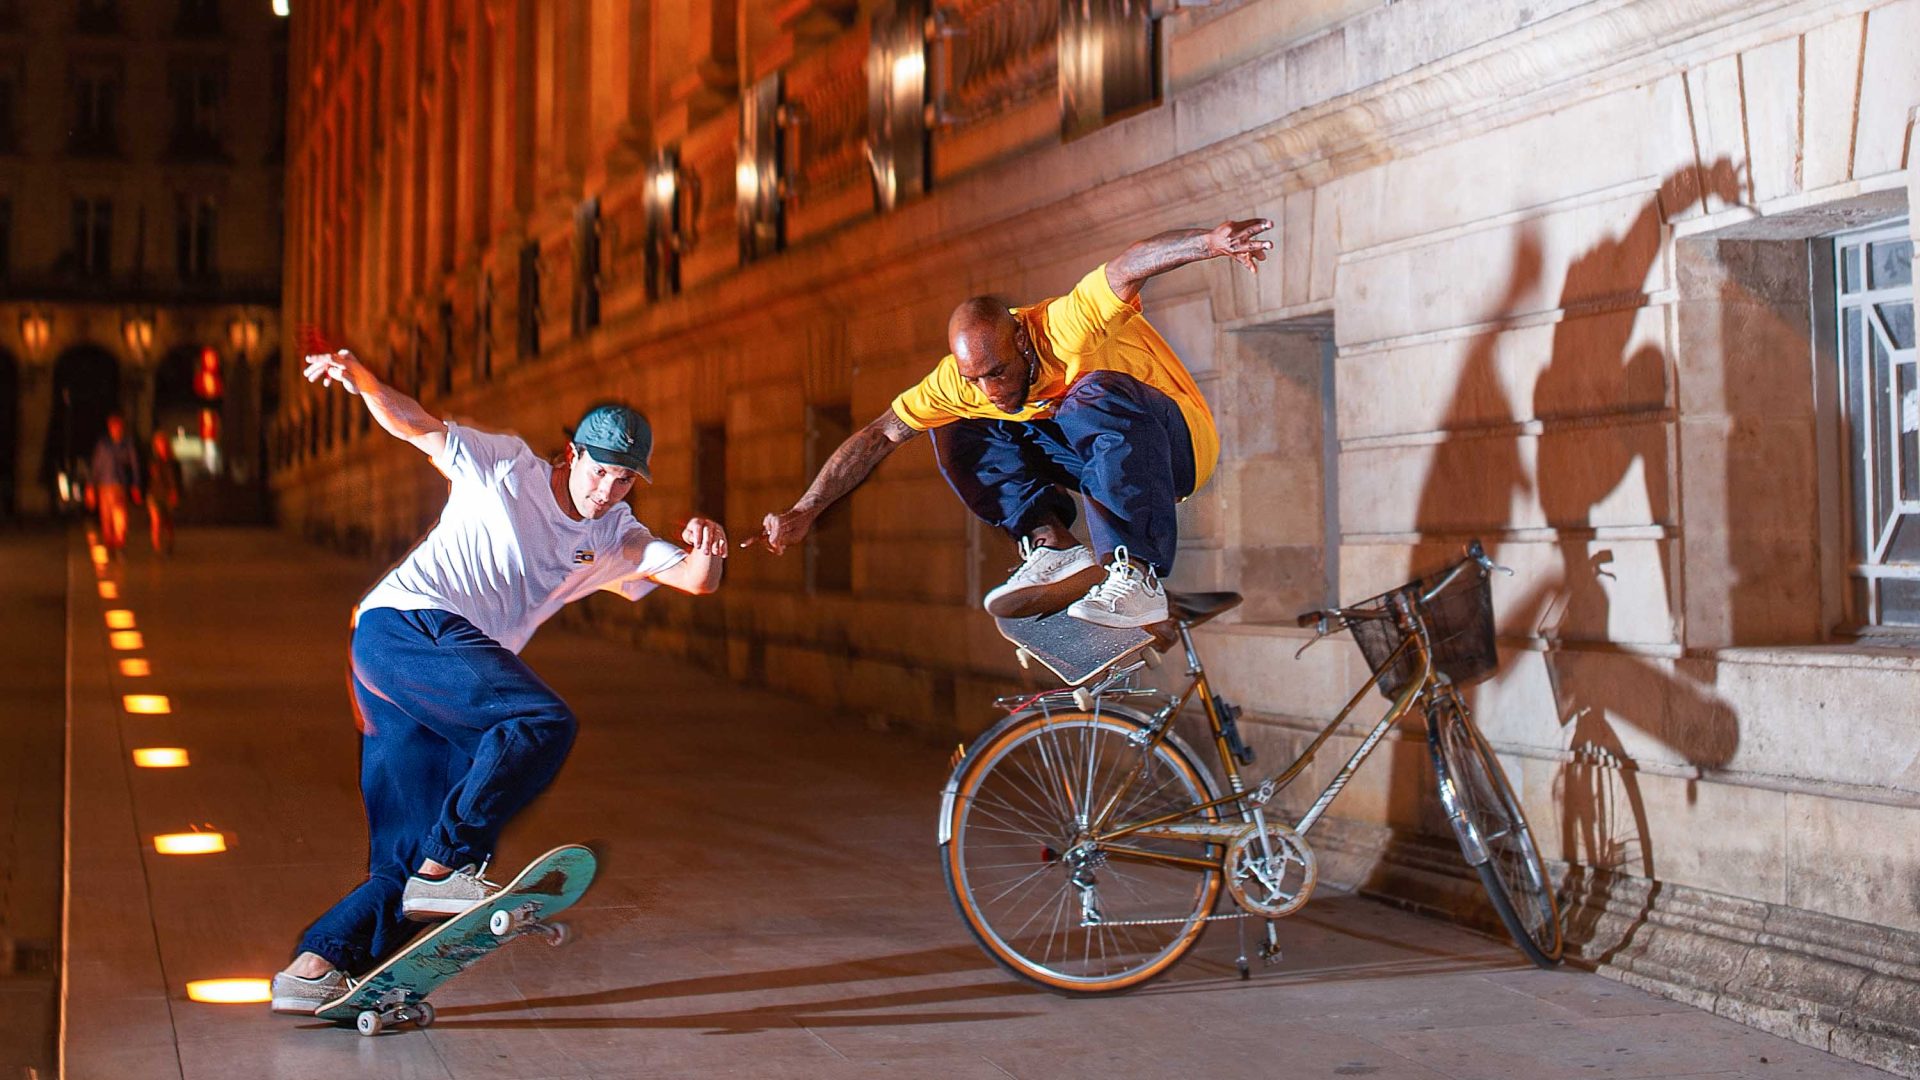 Leo on his skateboard while another man does an ollie over a bike.